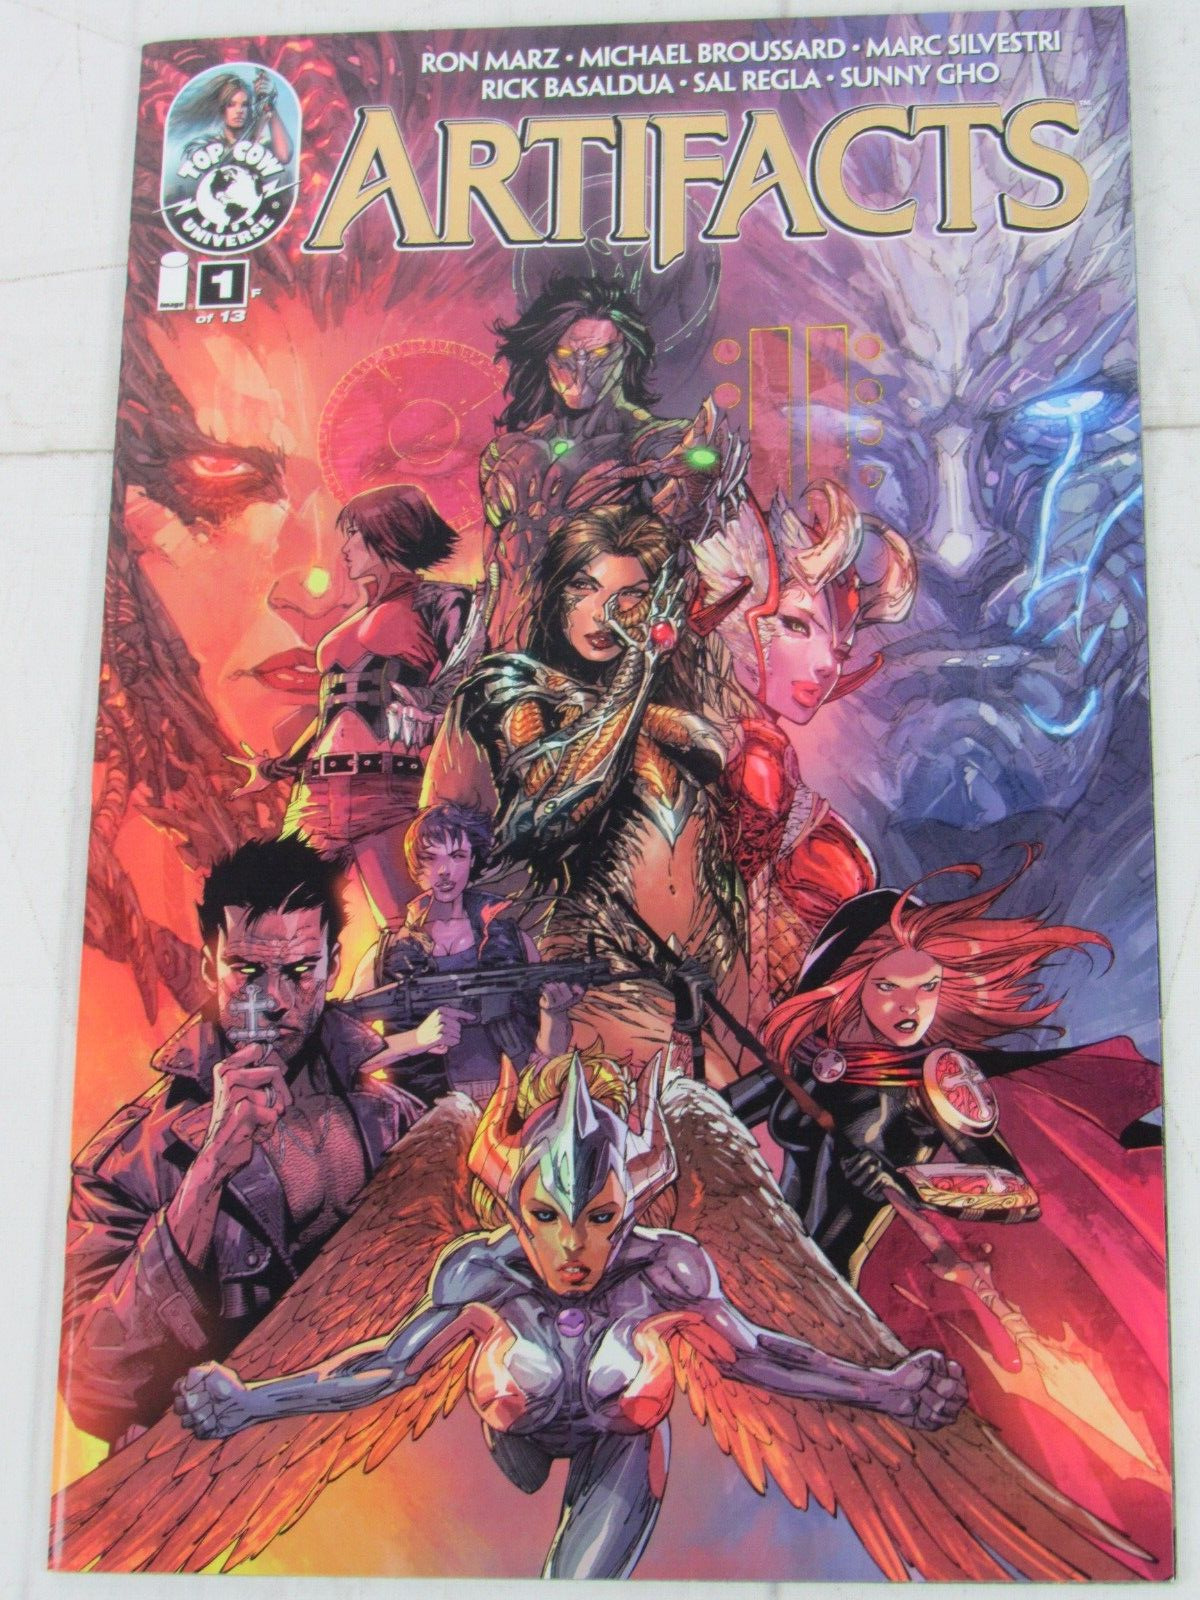 Artifacts #1 July 2010 Top Cow Productions